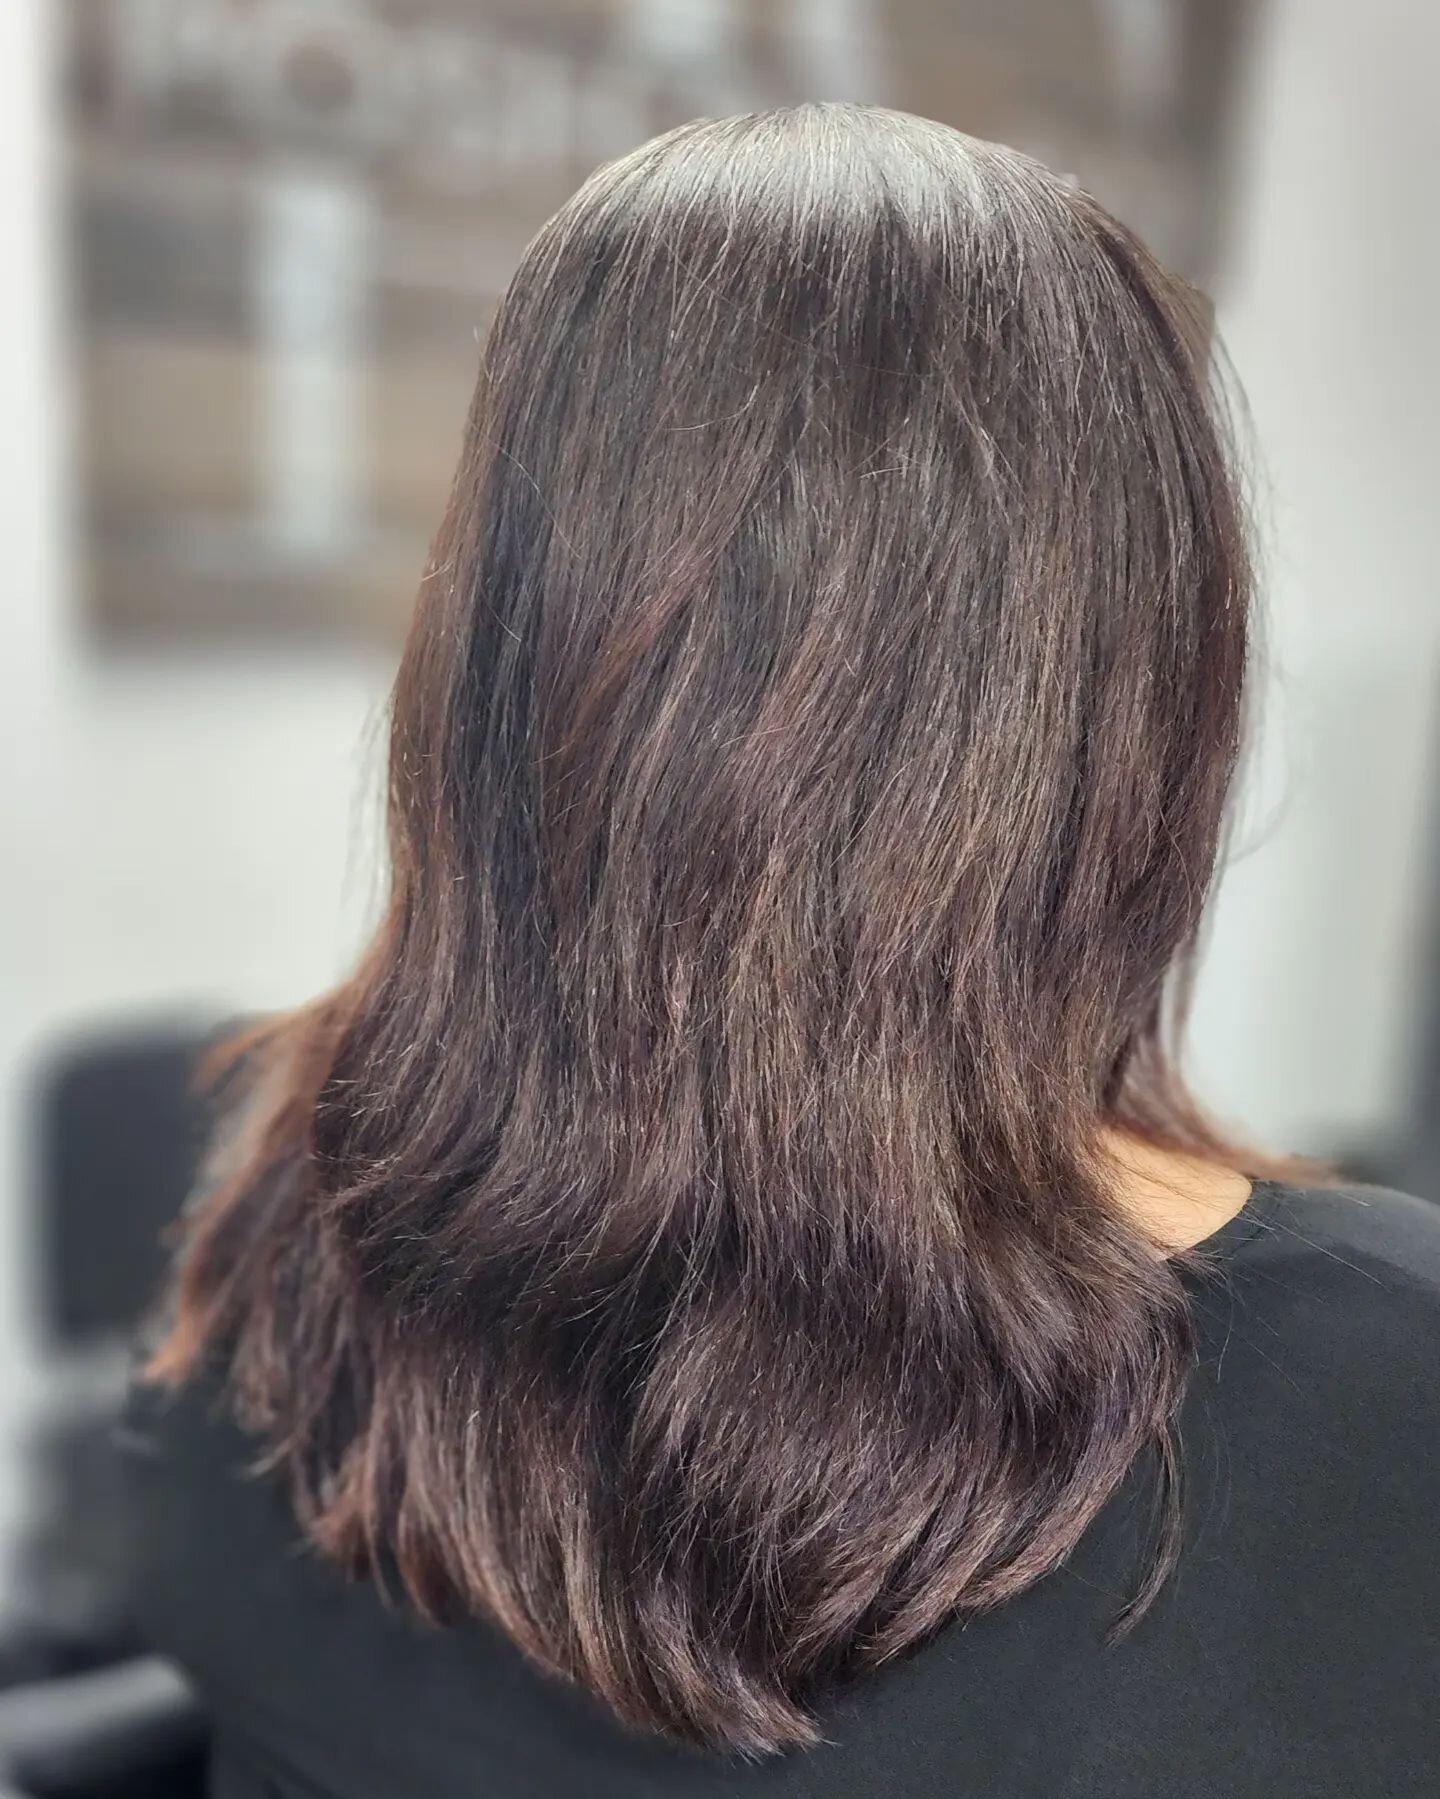 The process going to natural and silver can be a tough one.
We lightened using Davines progress 30vol on the ends of old color. .
Second step we added highlights and for the base we used view 4,18 and charcoal. 20min
Finally we Toned with 10,21 and s